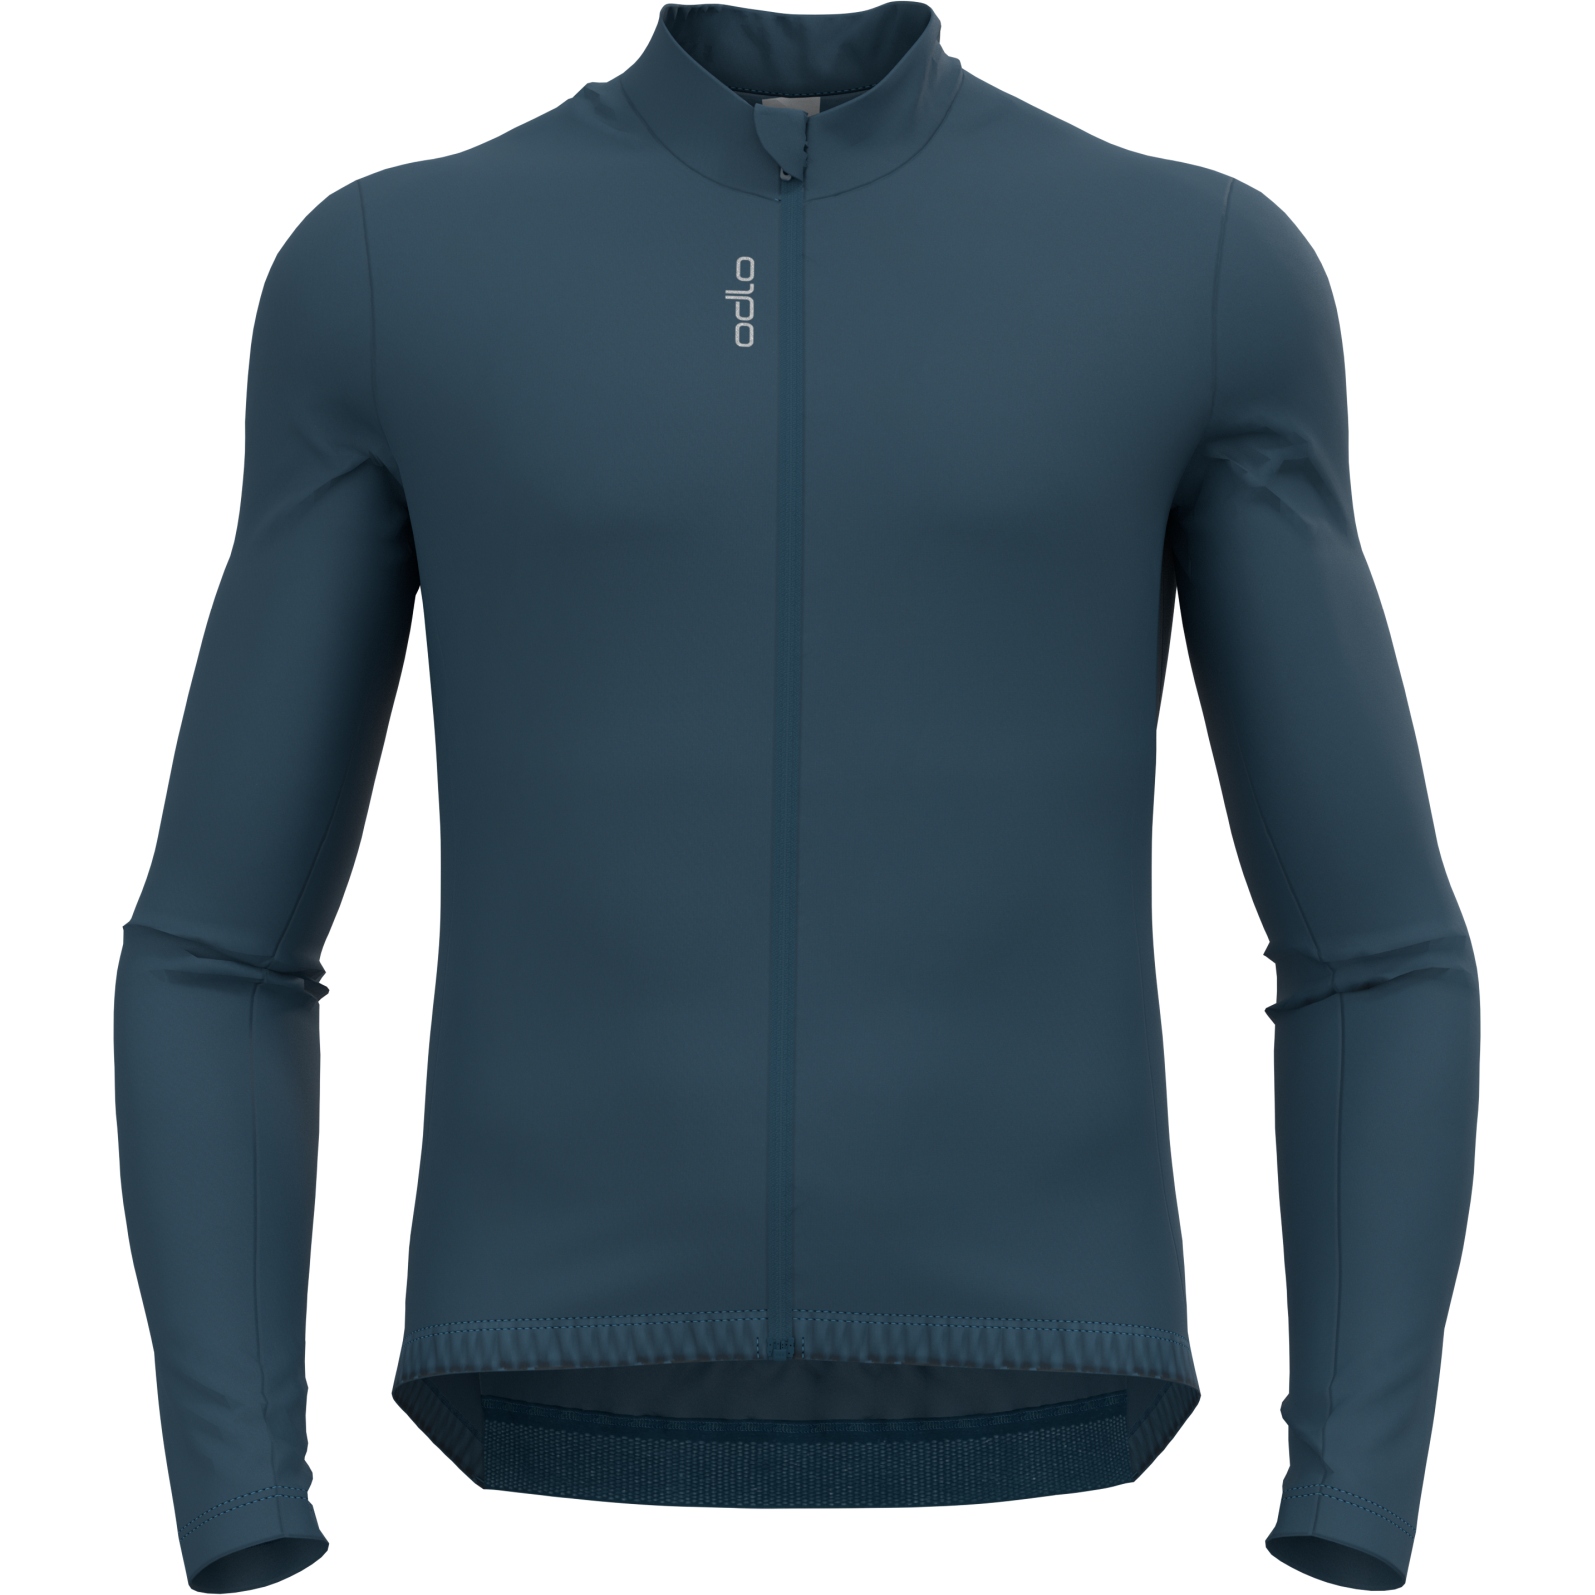 Picture of Odlo Zeroweight Ceramiwarm Mid Layer Jersey Men - deep dive